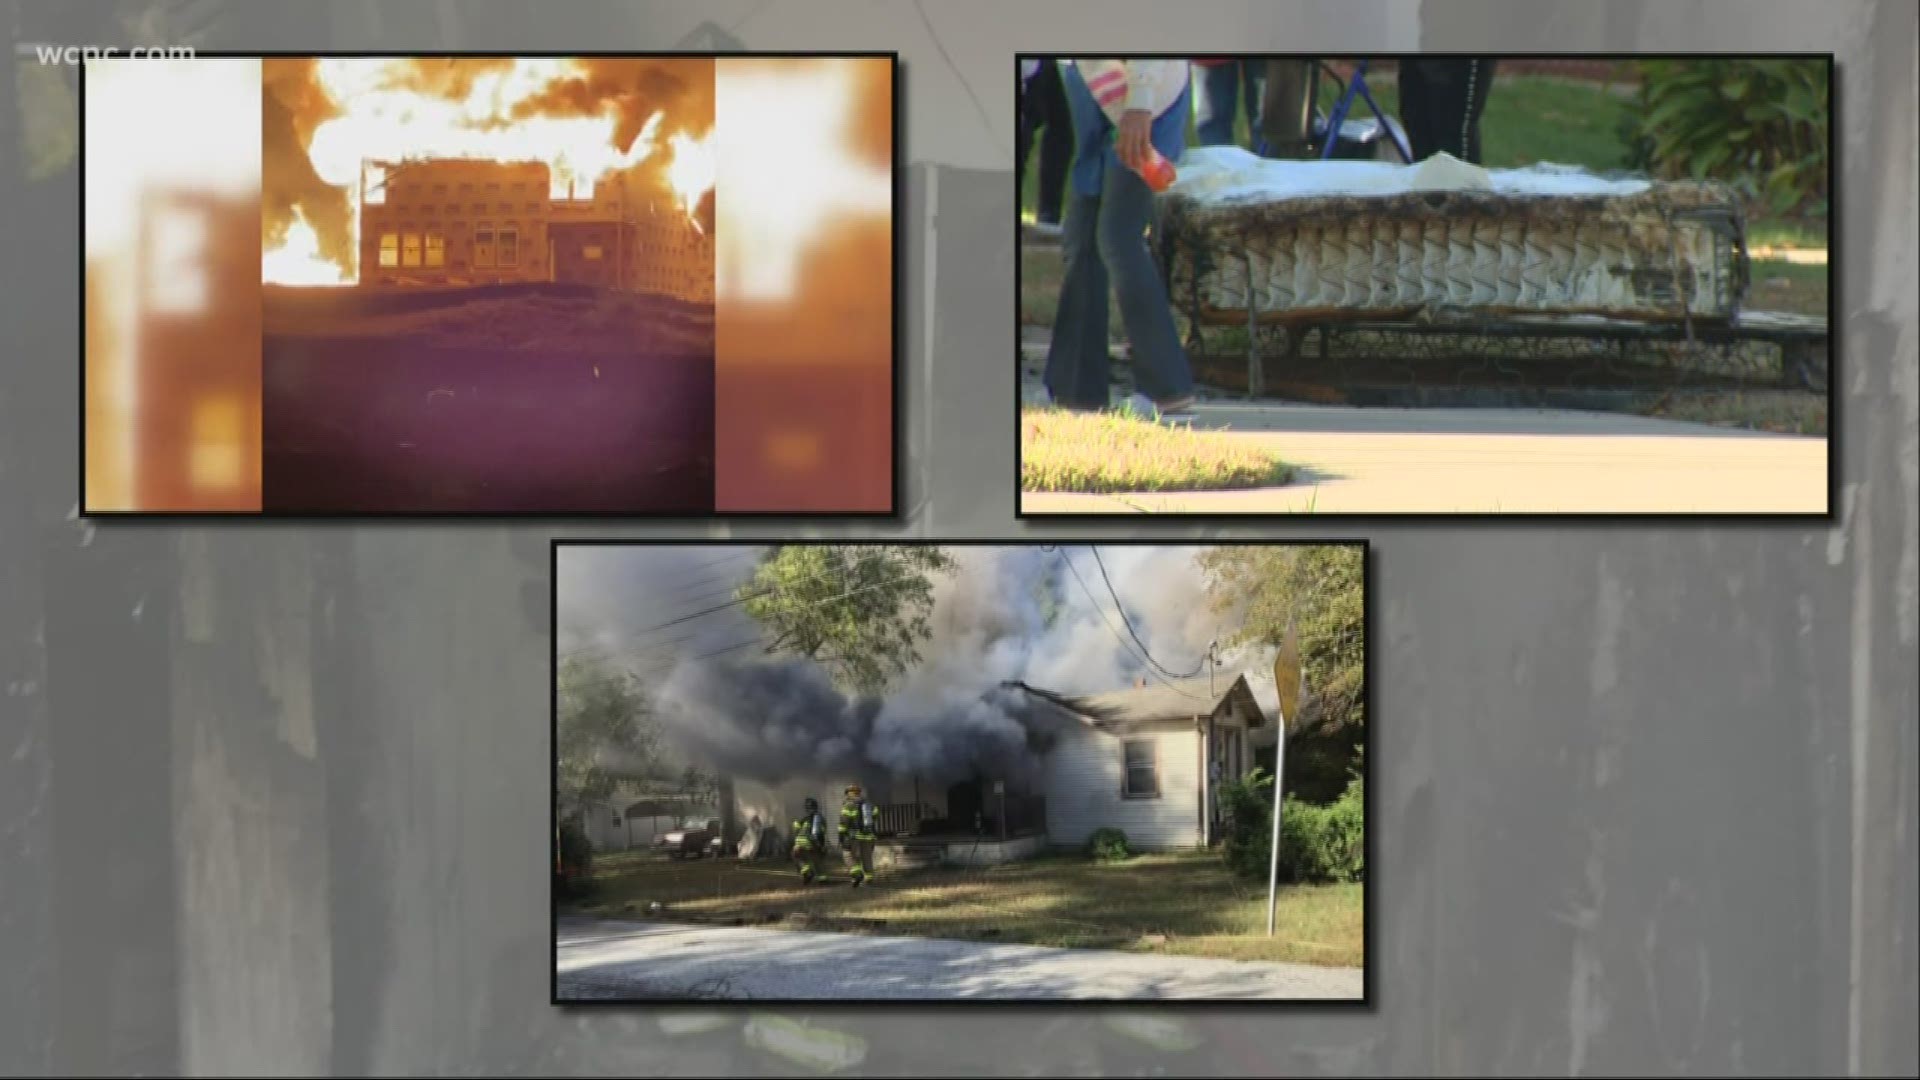 There were no reported injuries from these fires, but officials are urging the public to follow proper safety tips.